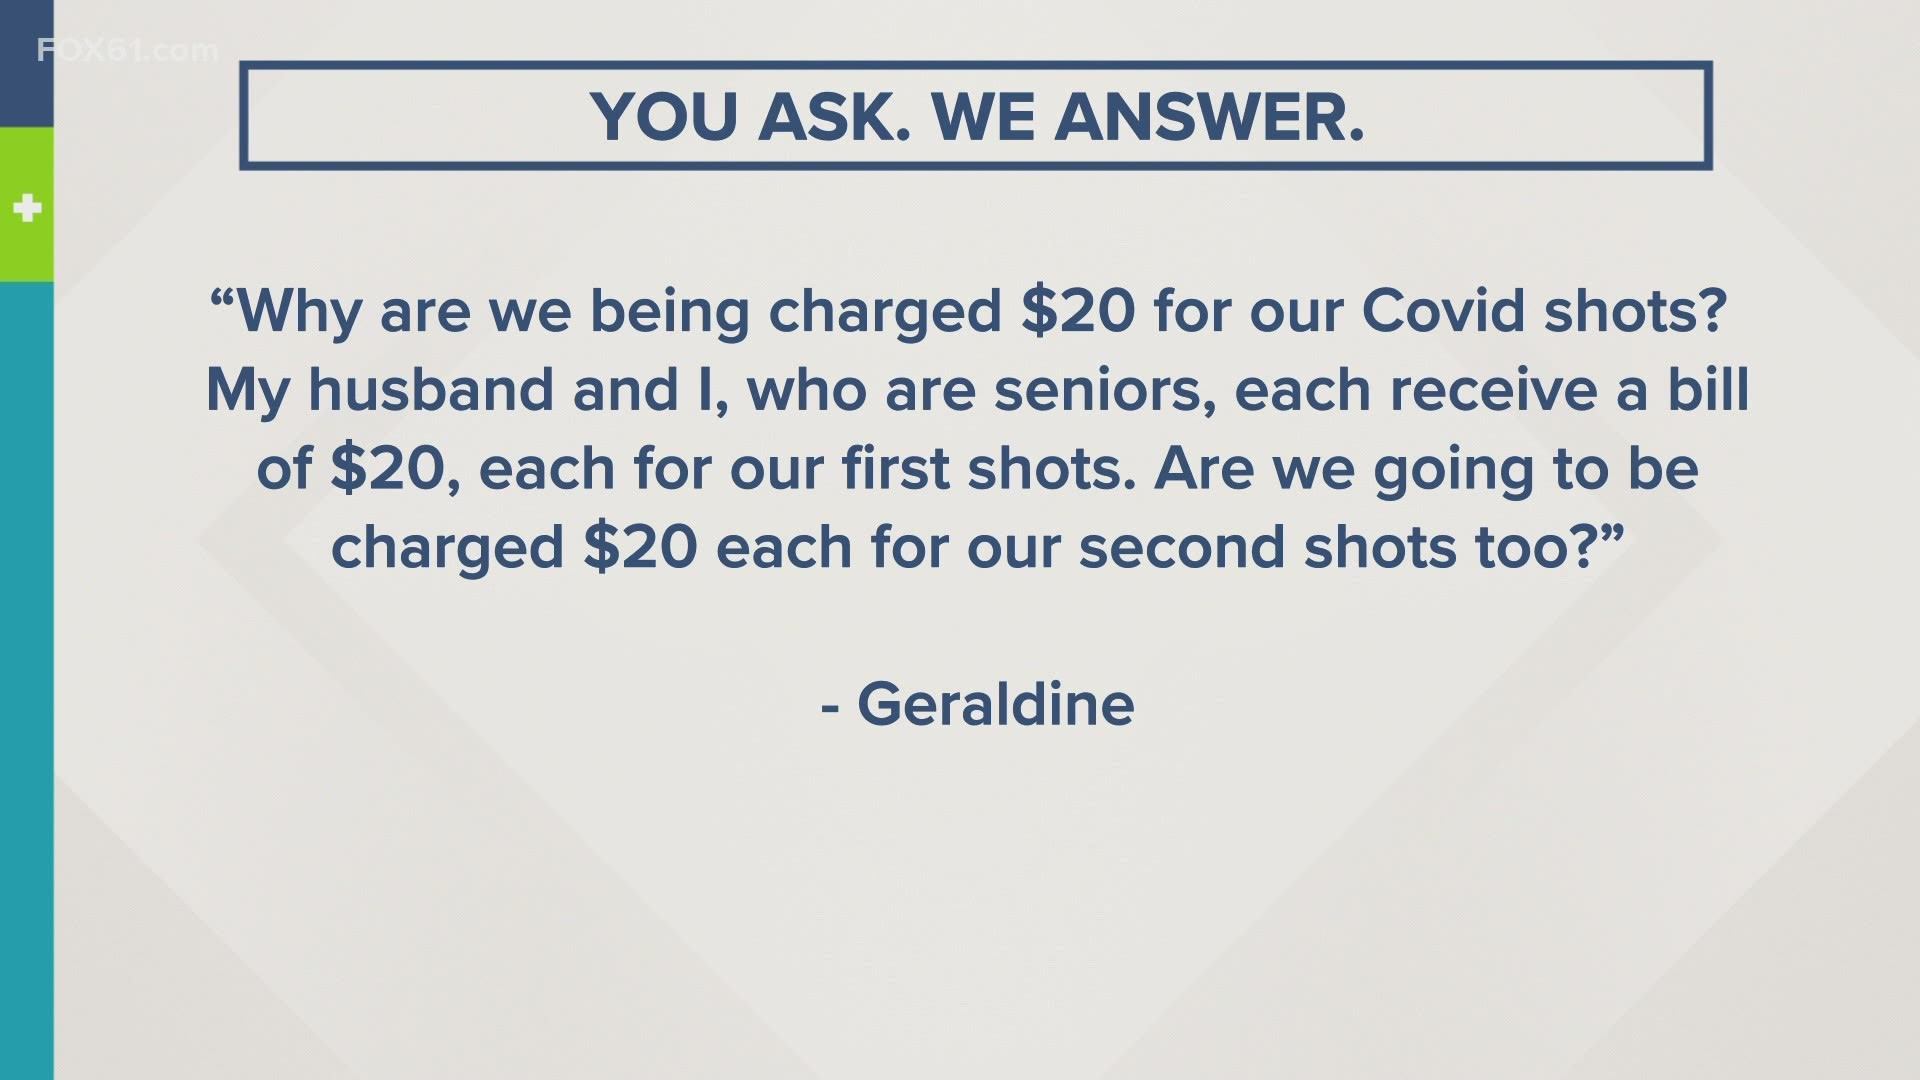 "My husband and I, who are seniors, each receive a bill of $20, each for our first shots"